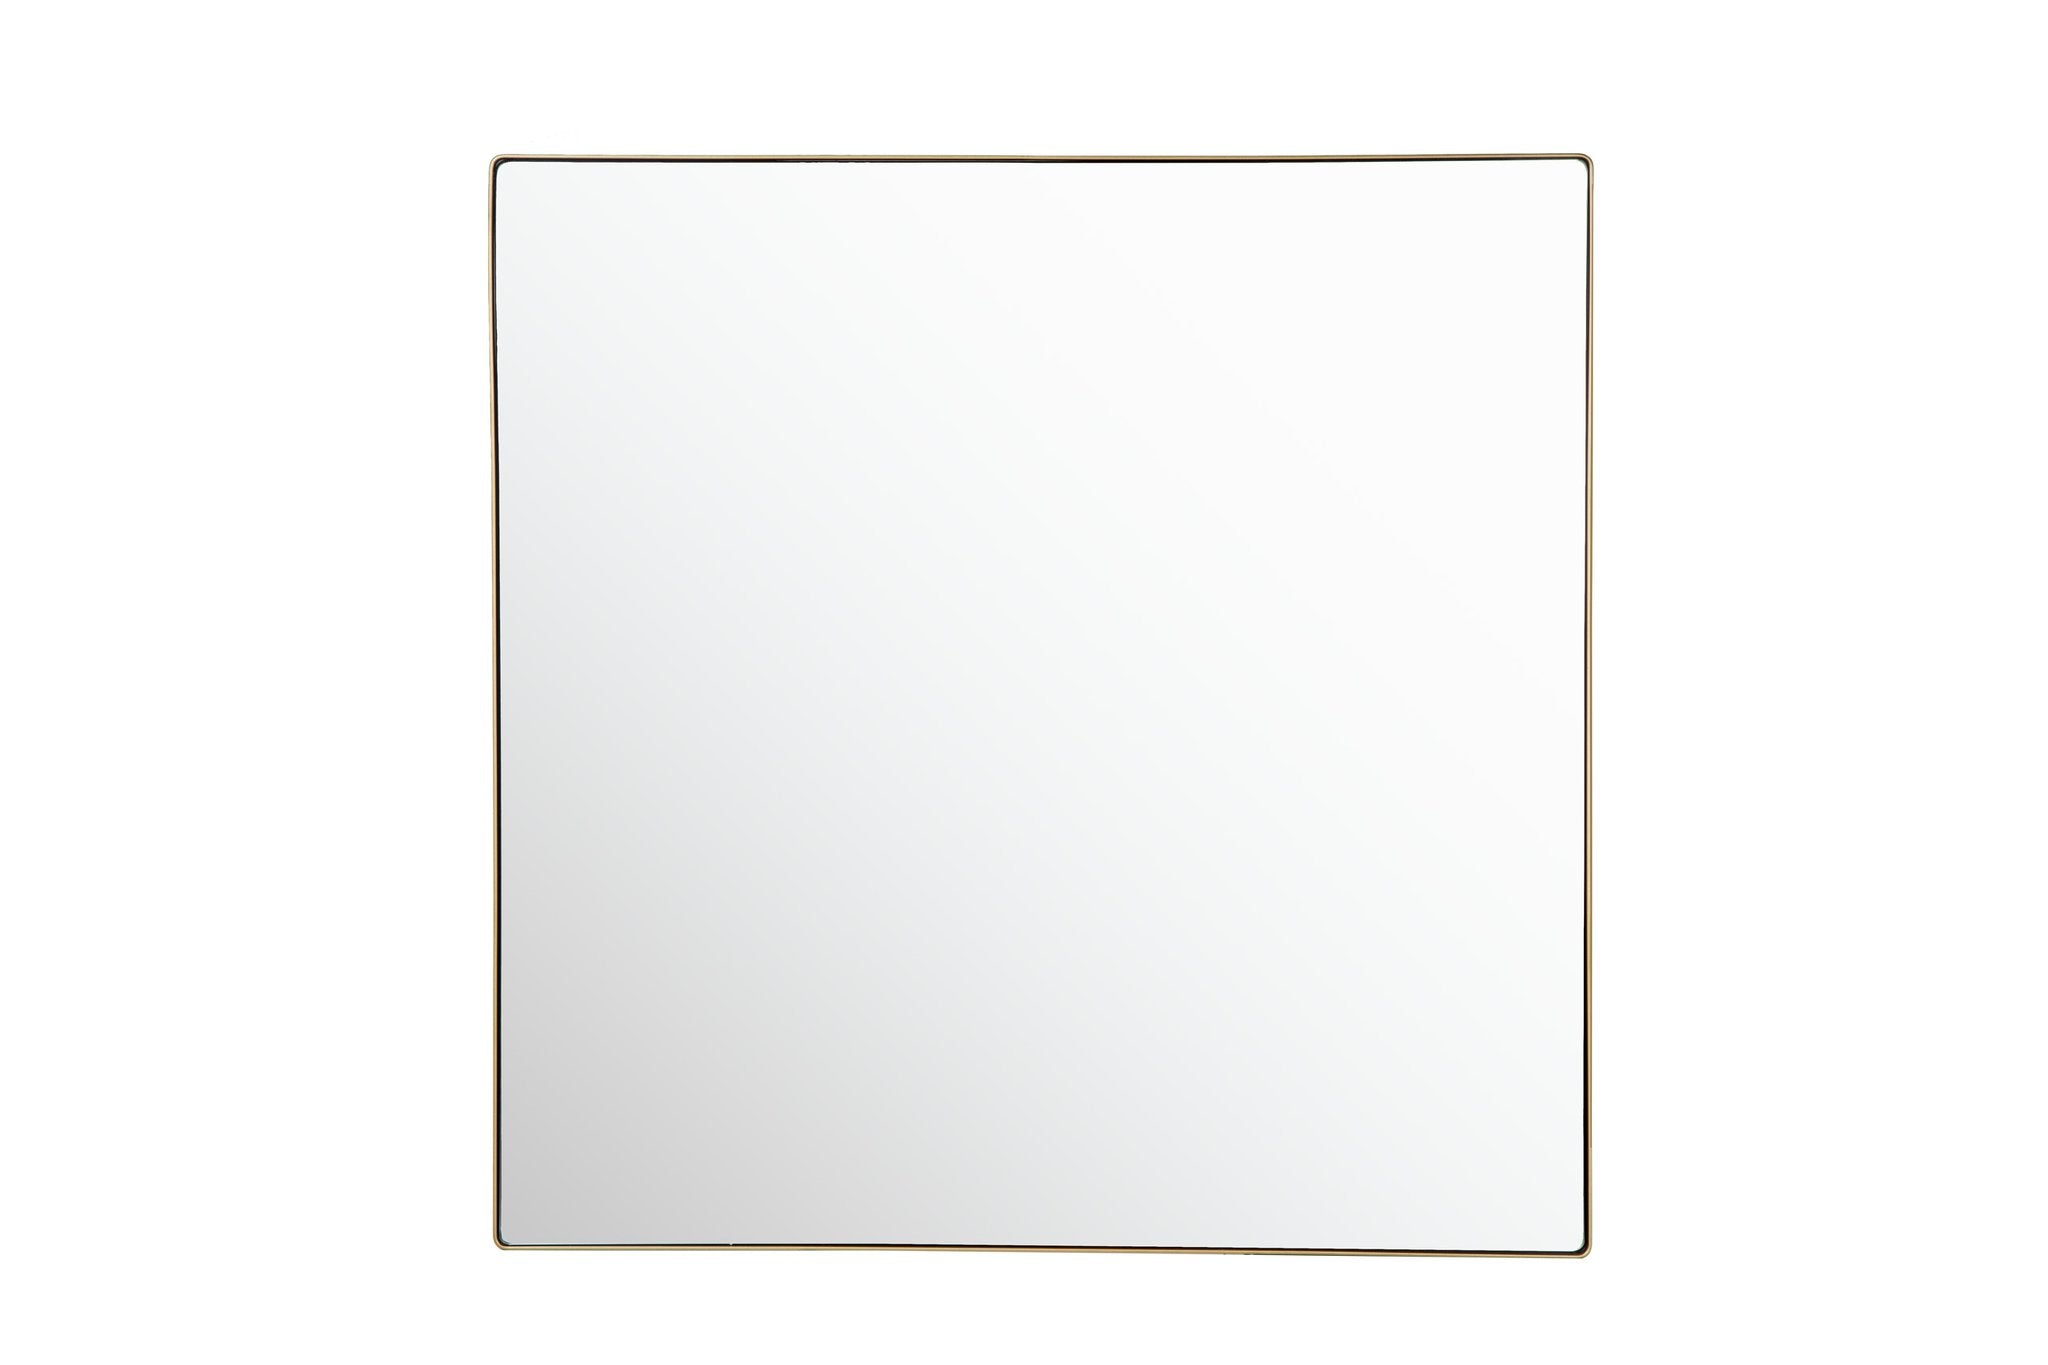 Varaluz Kye Rounded Square Mirror - 40x40